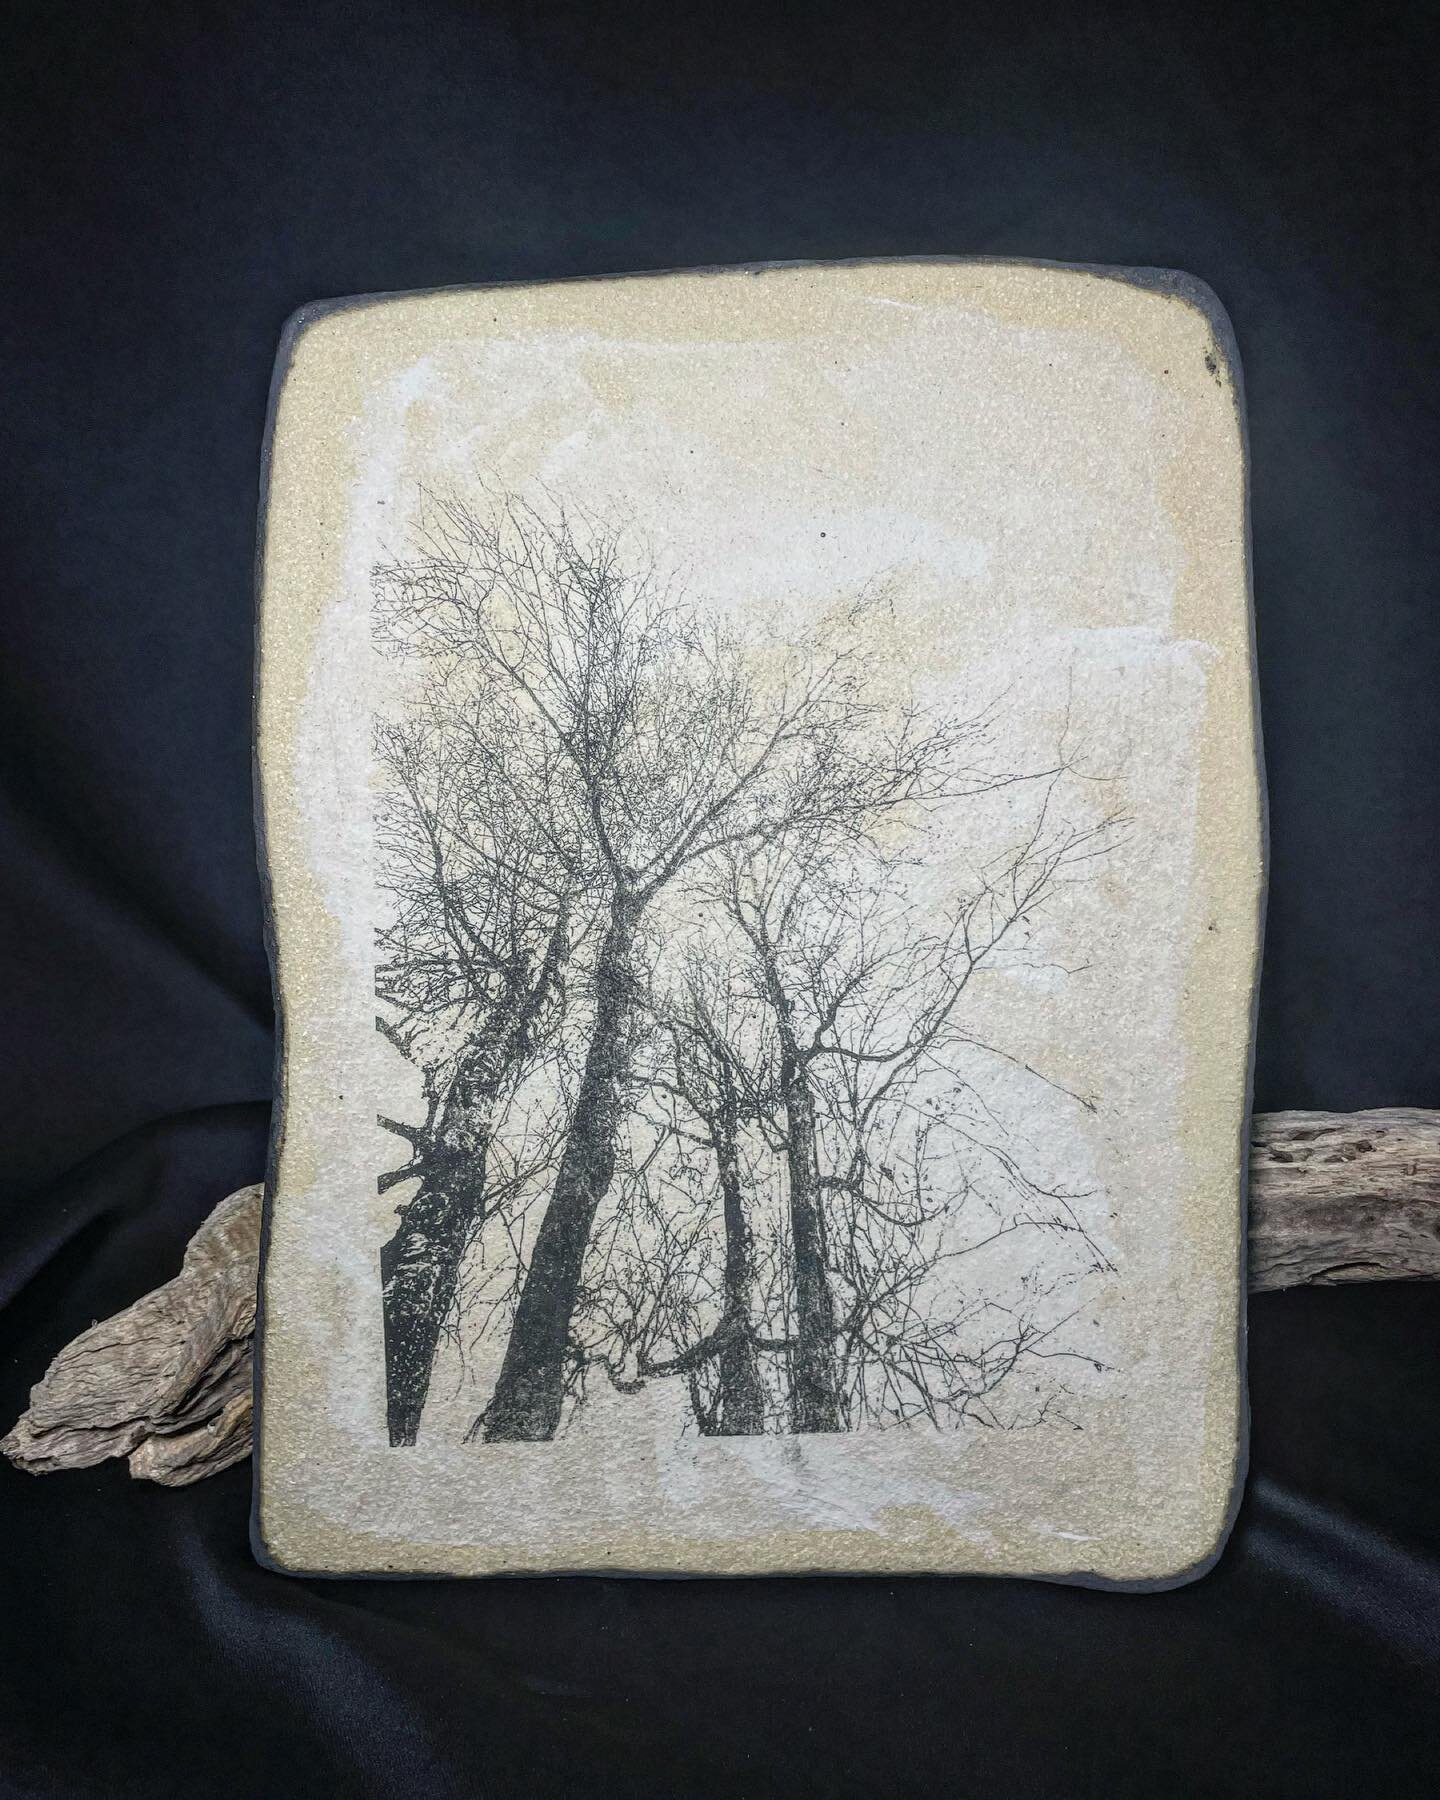 Chattering trees.
Silver birches.

SOLD

Approx 20 x 30cm. Wall piece.

White grog clay with a porcelain slip and black copper oxide edge, with own original photo using a lithographic printmaking technique.

#oneofakind #photolithographyonclay #graph